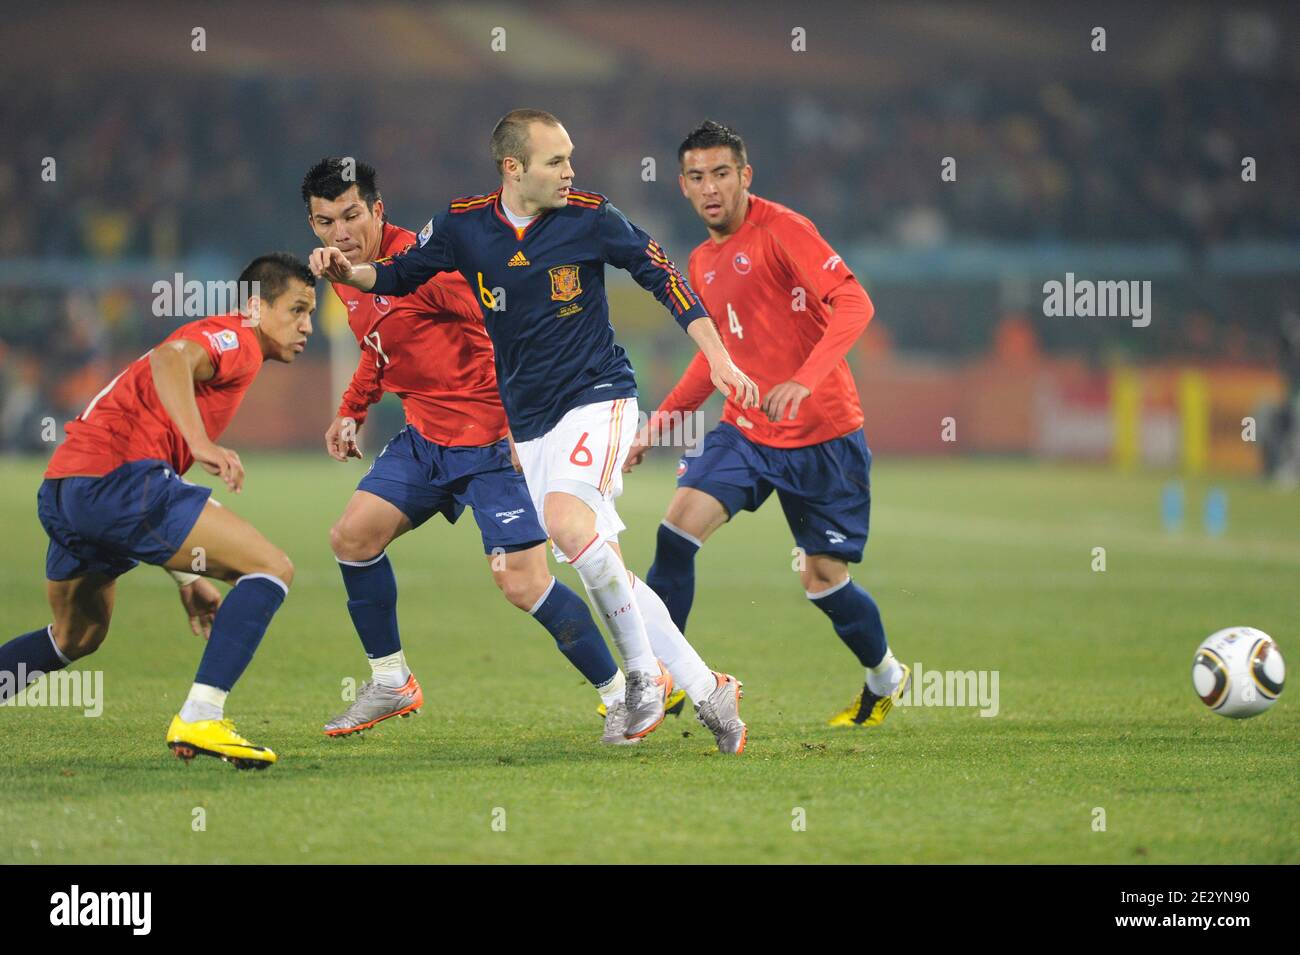 Spain's Andres Iniesta during the 2010 FIFA World Cup South Africa Soccer match, group H, Spain vs Chile at Loftus Versfeld football stadium in Pretoria, South Africa on June 25, 2010. Spain won 2-1. Photo by Henri Szwarc/ABACAPRESS.COM Stock Photo